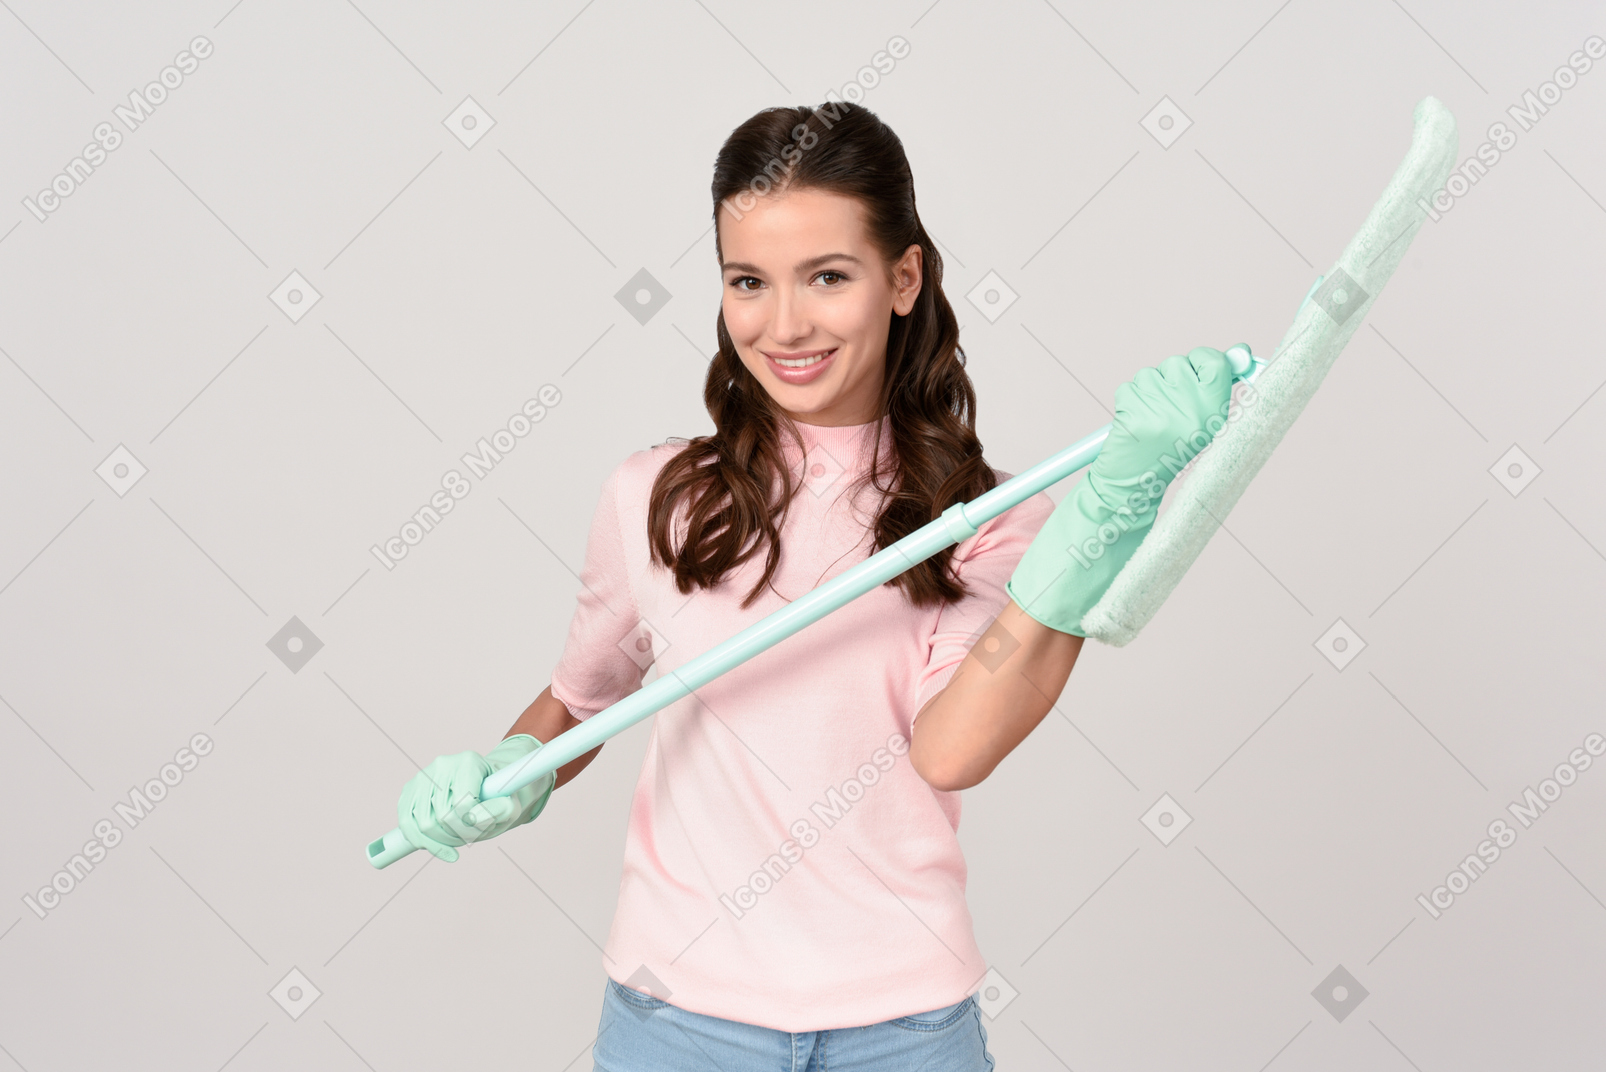 Attractive young woman holding a mop